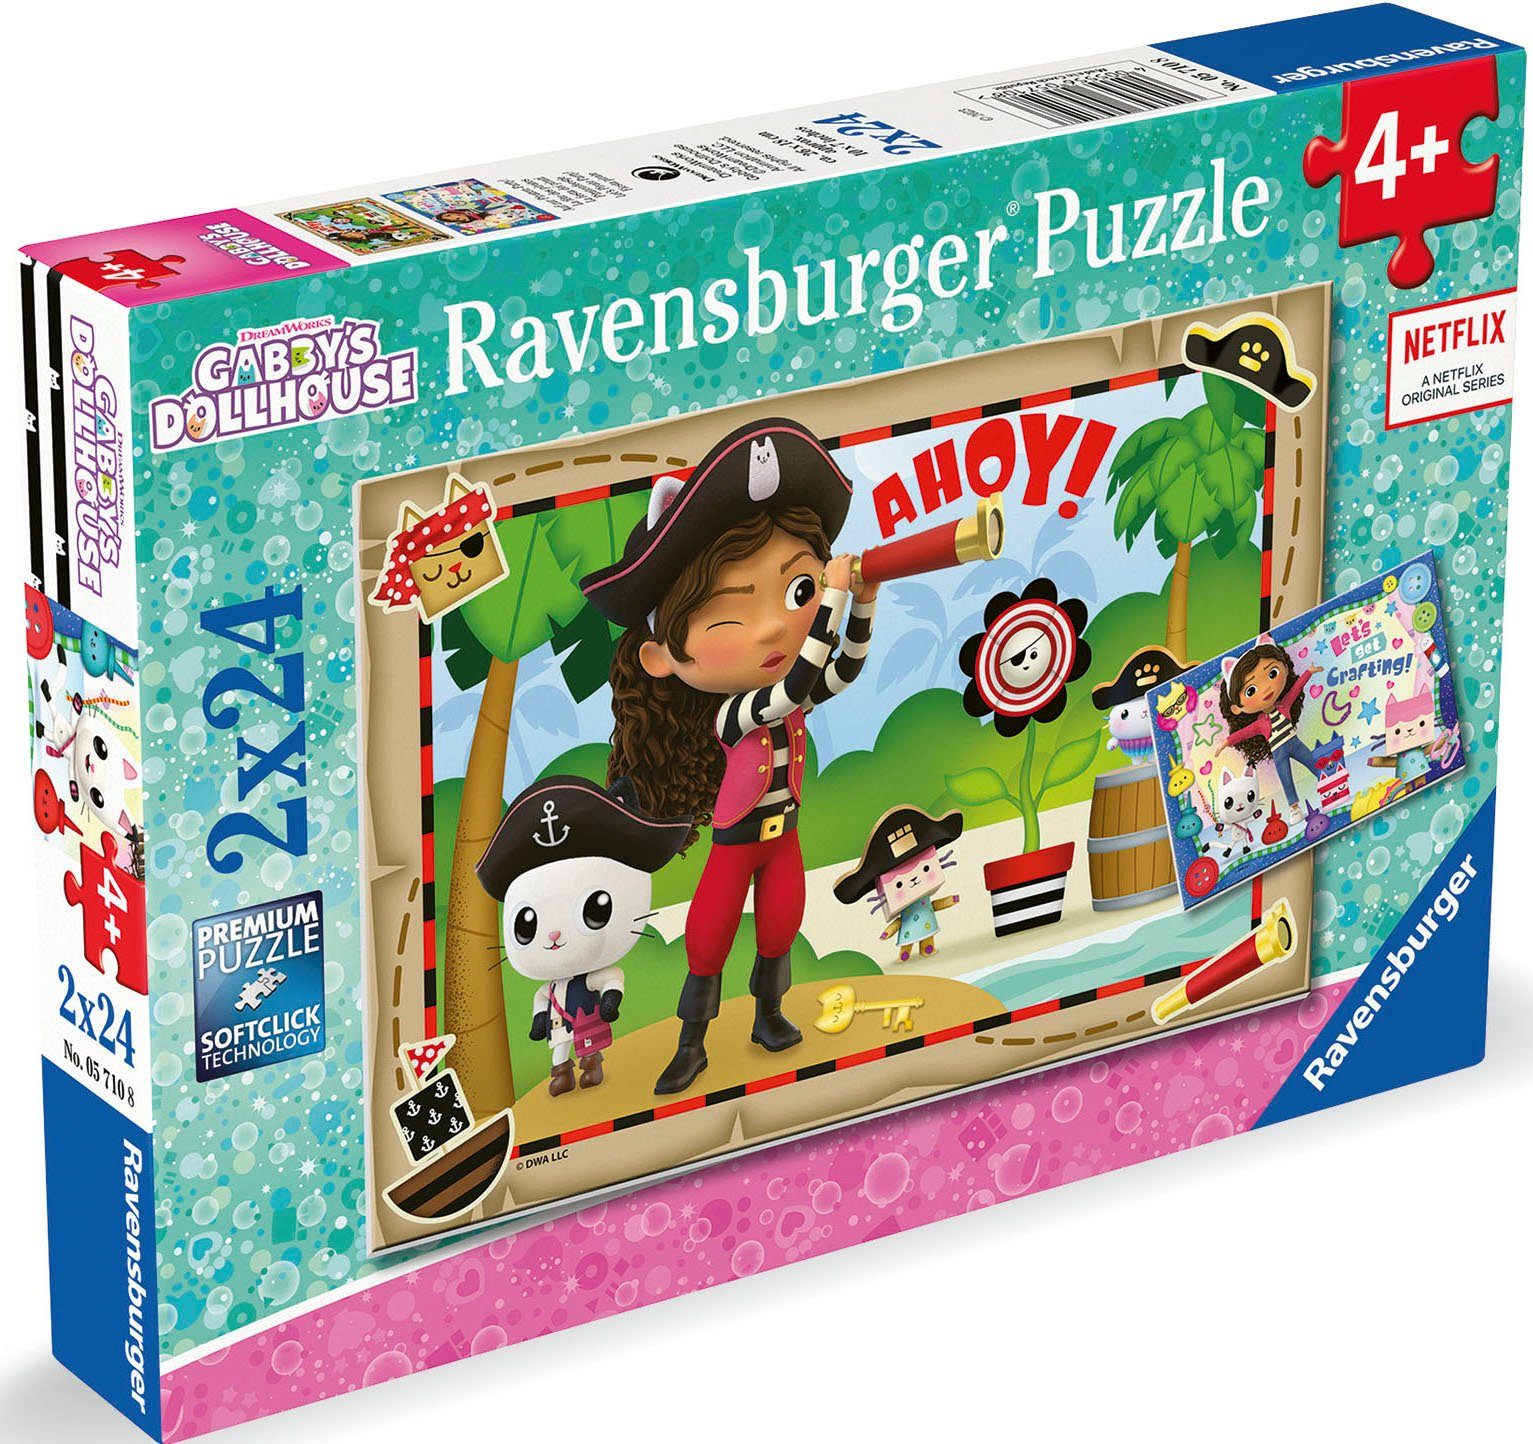 Ravensburger Puzzle Gabby's Dollhouse, 2x24, Puzzleteile, in Made 48 Europe